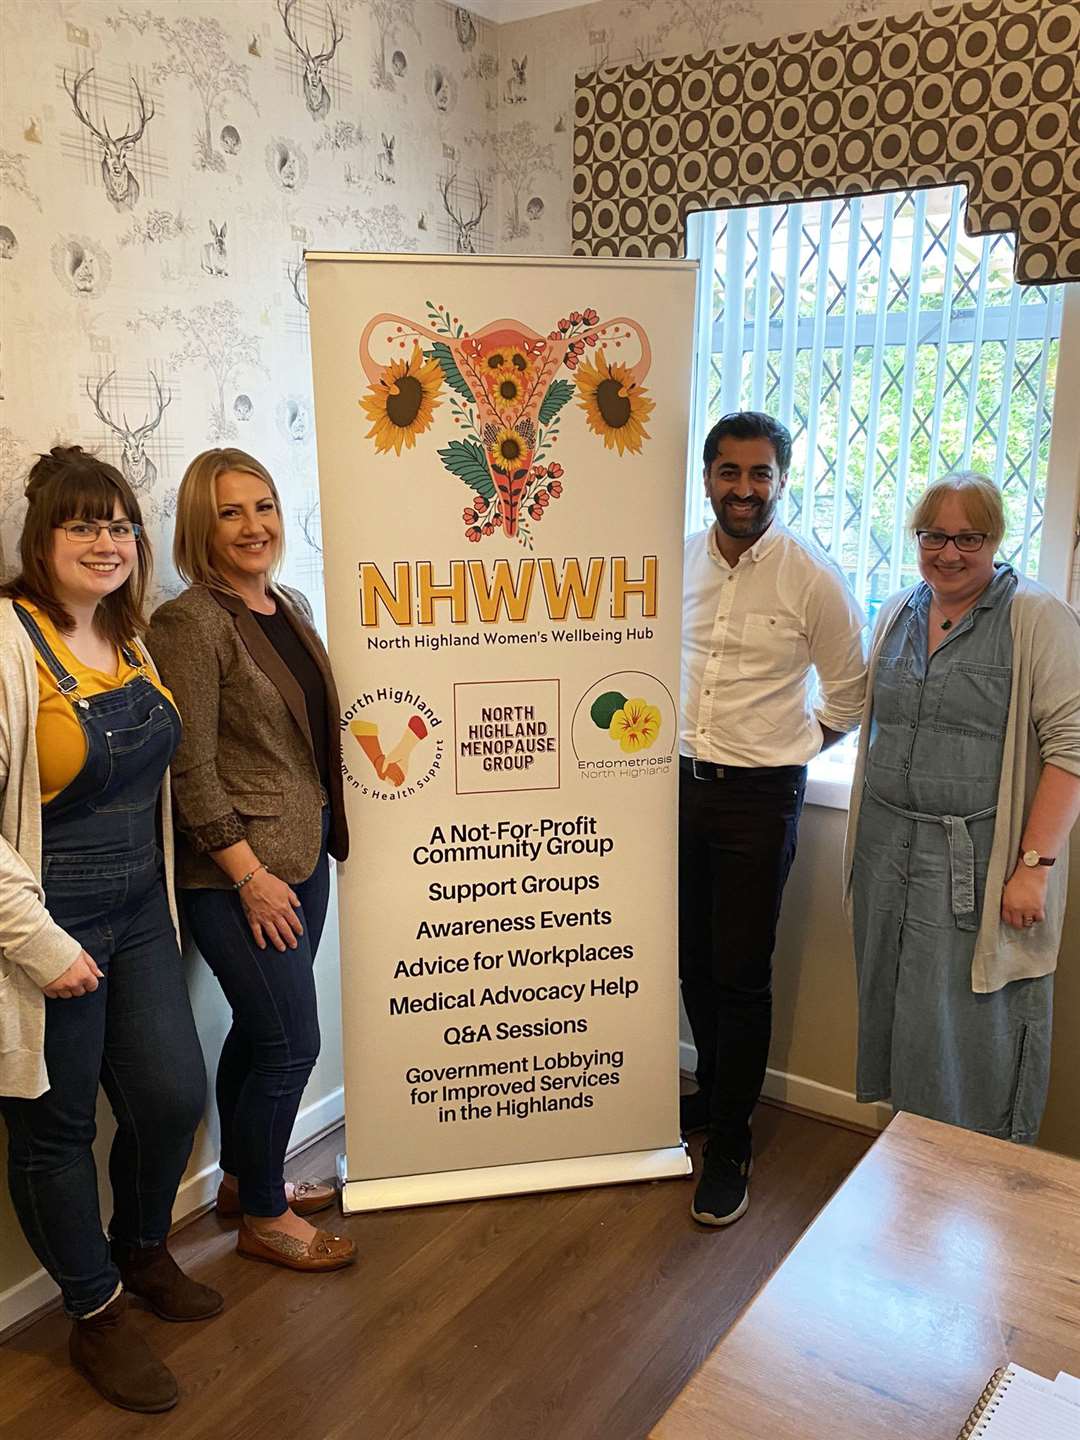 Health secretary Humza Yousaf in Wick in August with North Highland Women’s Wellbeing Hub representatives (from left) Rebecca Wymer, Claire Clark and Kirsteen Campbell.